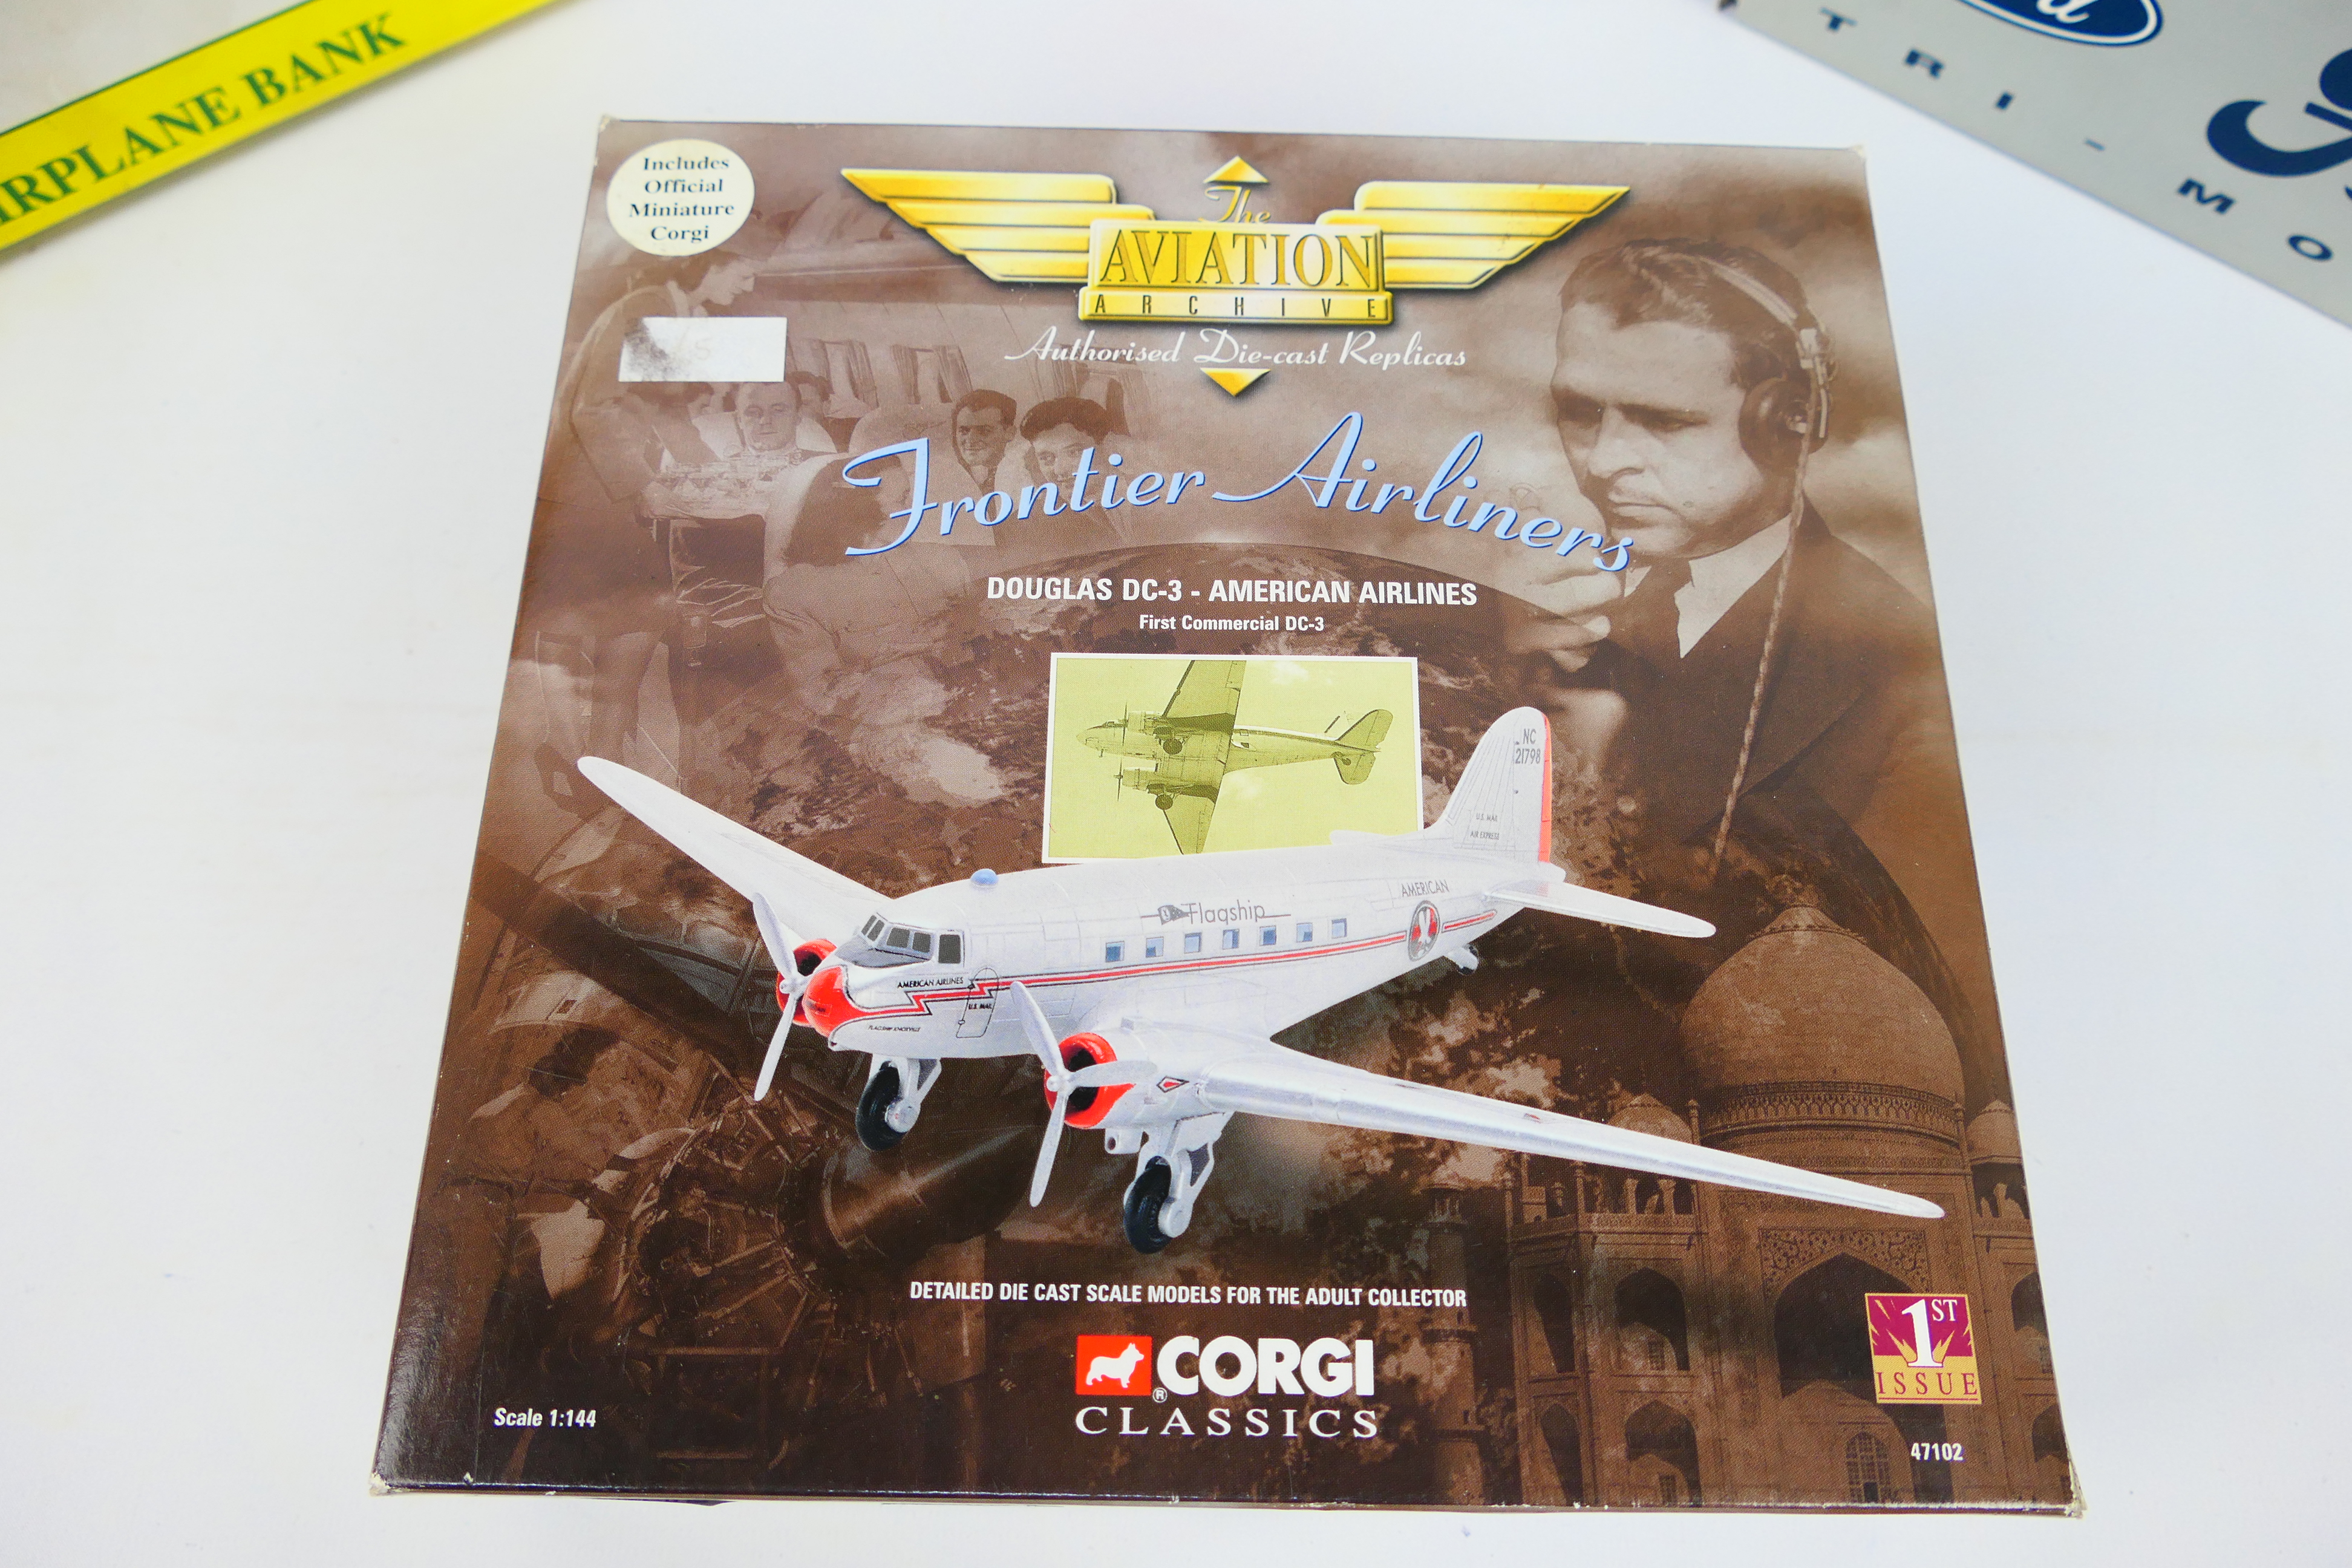 Corgi Aviation Archive - Ertl Collectibles - A boxed diecast model aircraft and three diecast model - Image 3 of 6